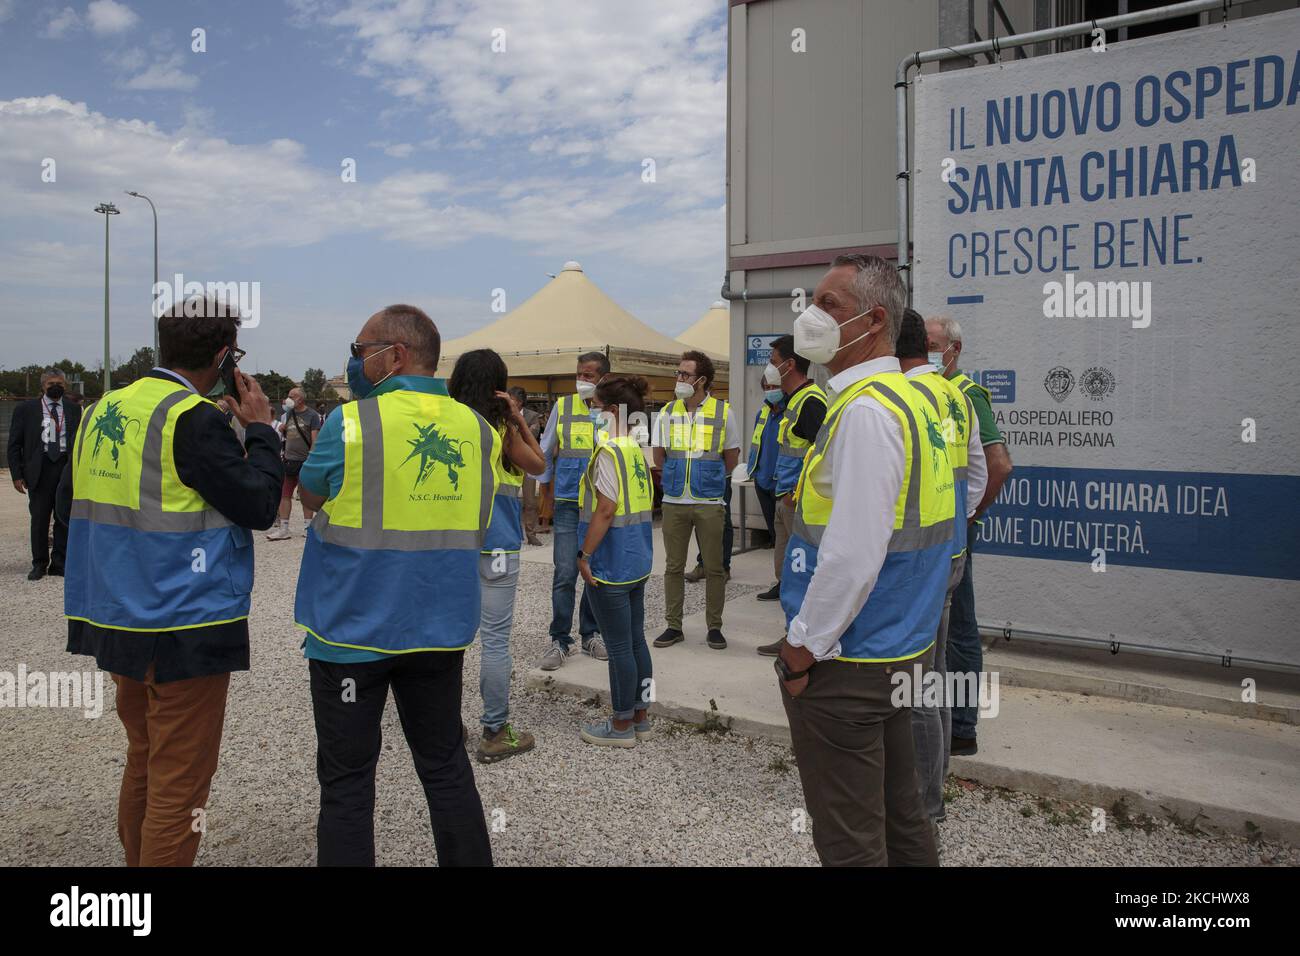 Eugenio Giani visits the new hospital's construction site in Pisa, Italy, on July 27, 2021. The new buildings will turn the hospital of Pisa into one of the largest in Europe. (Photo by Enrico Mattia Del Punta/NurPhoto) Stock Photo